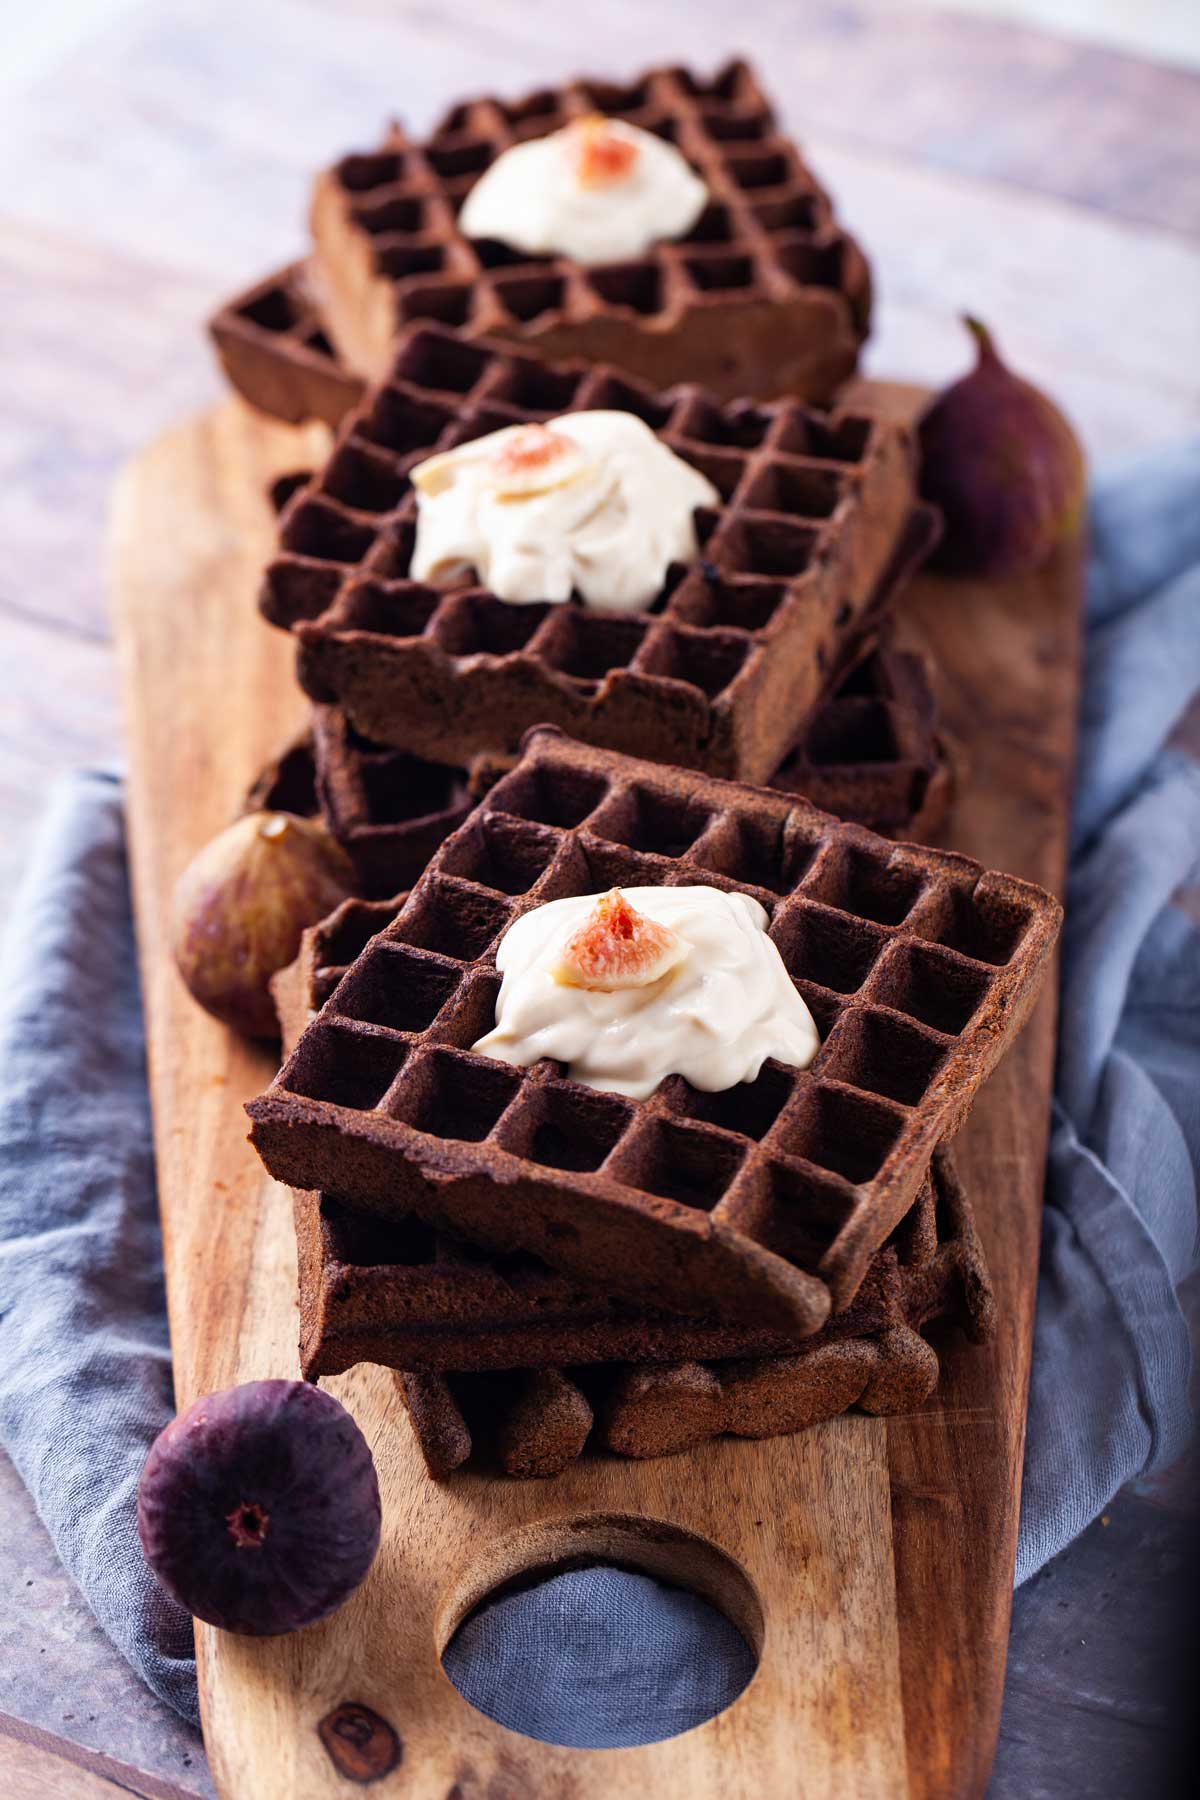 Buckwheat waffles topped with a dollop of yogurt and fresh figs served on a wooden board.